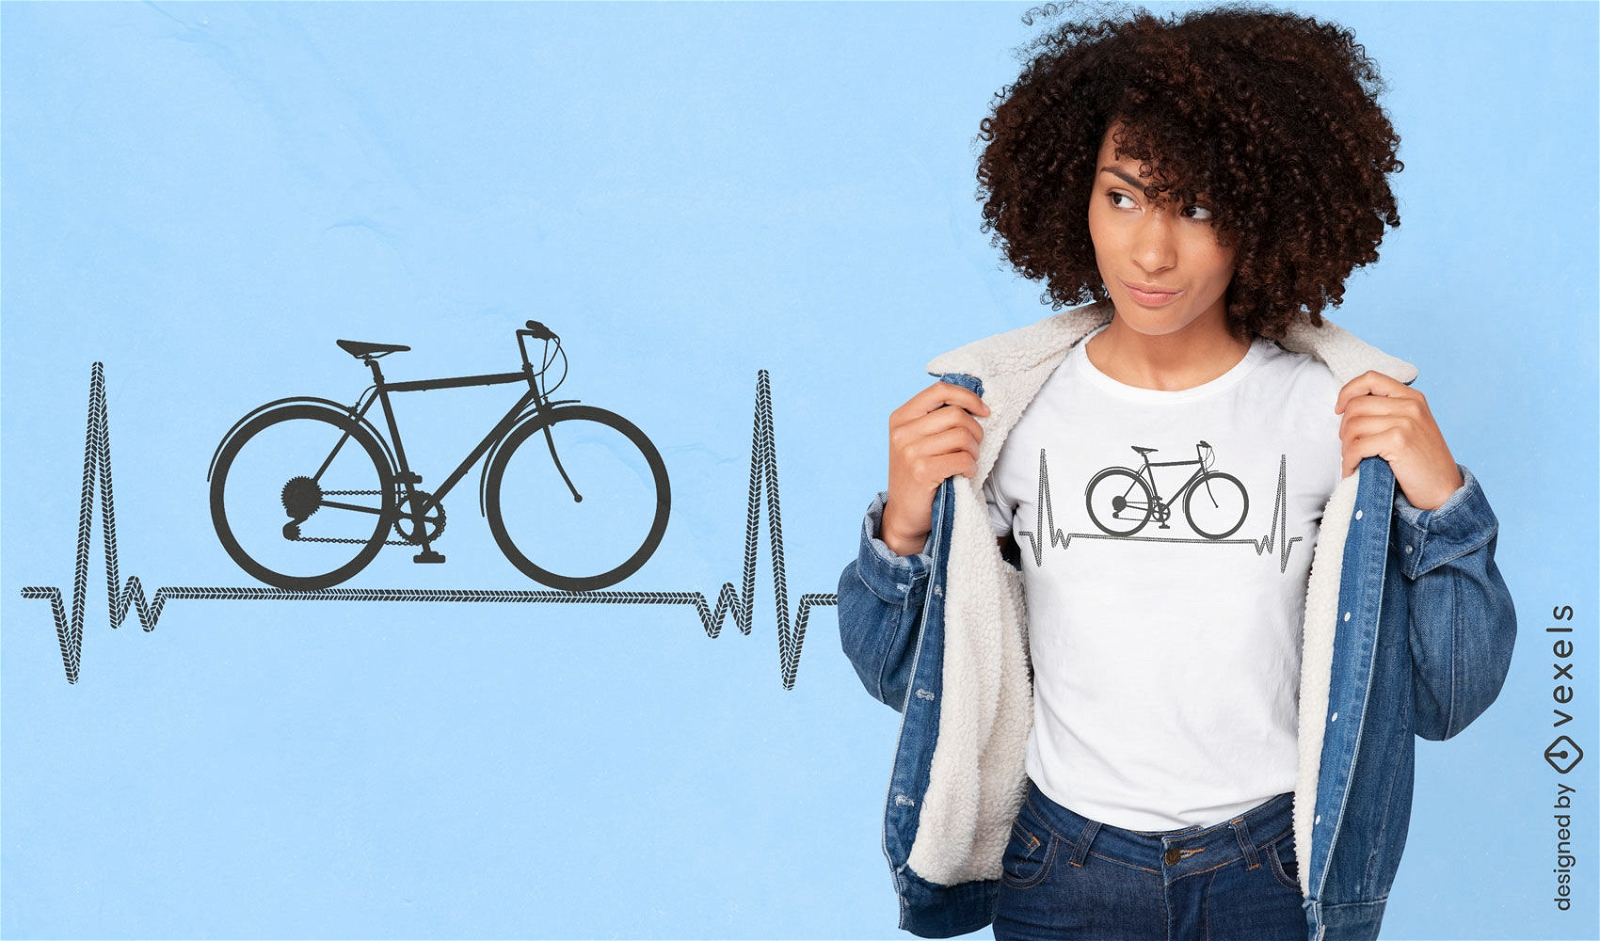 Bicycle over heartbeat line t-shirt design